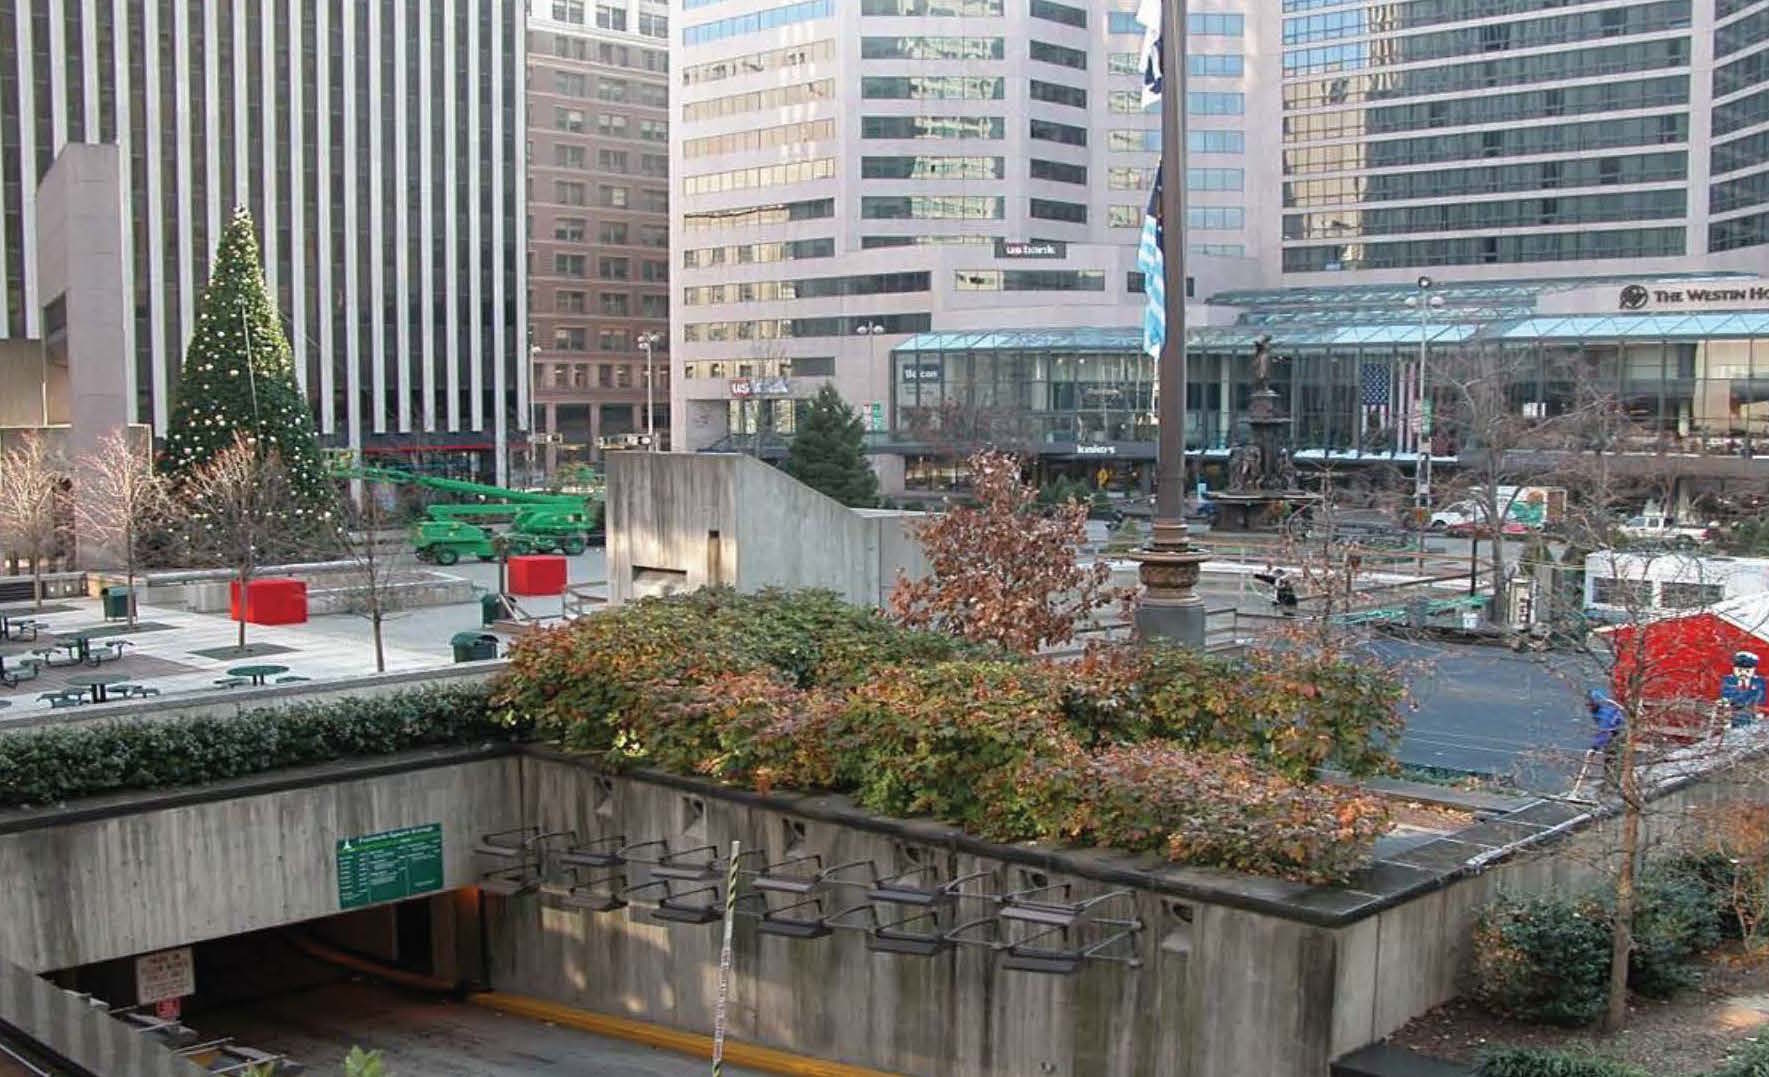 A view of Cincinnati's Fountain Park before its redevelopment.